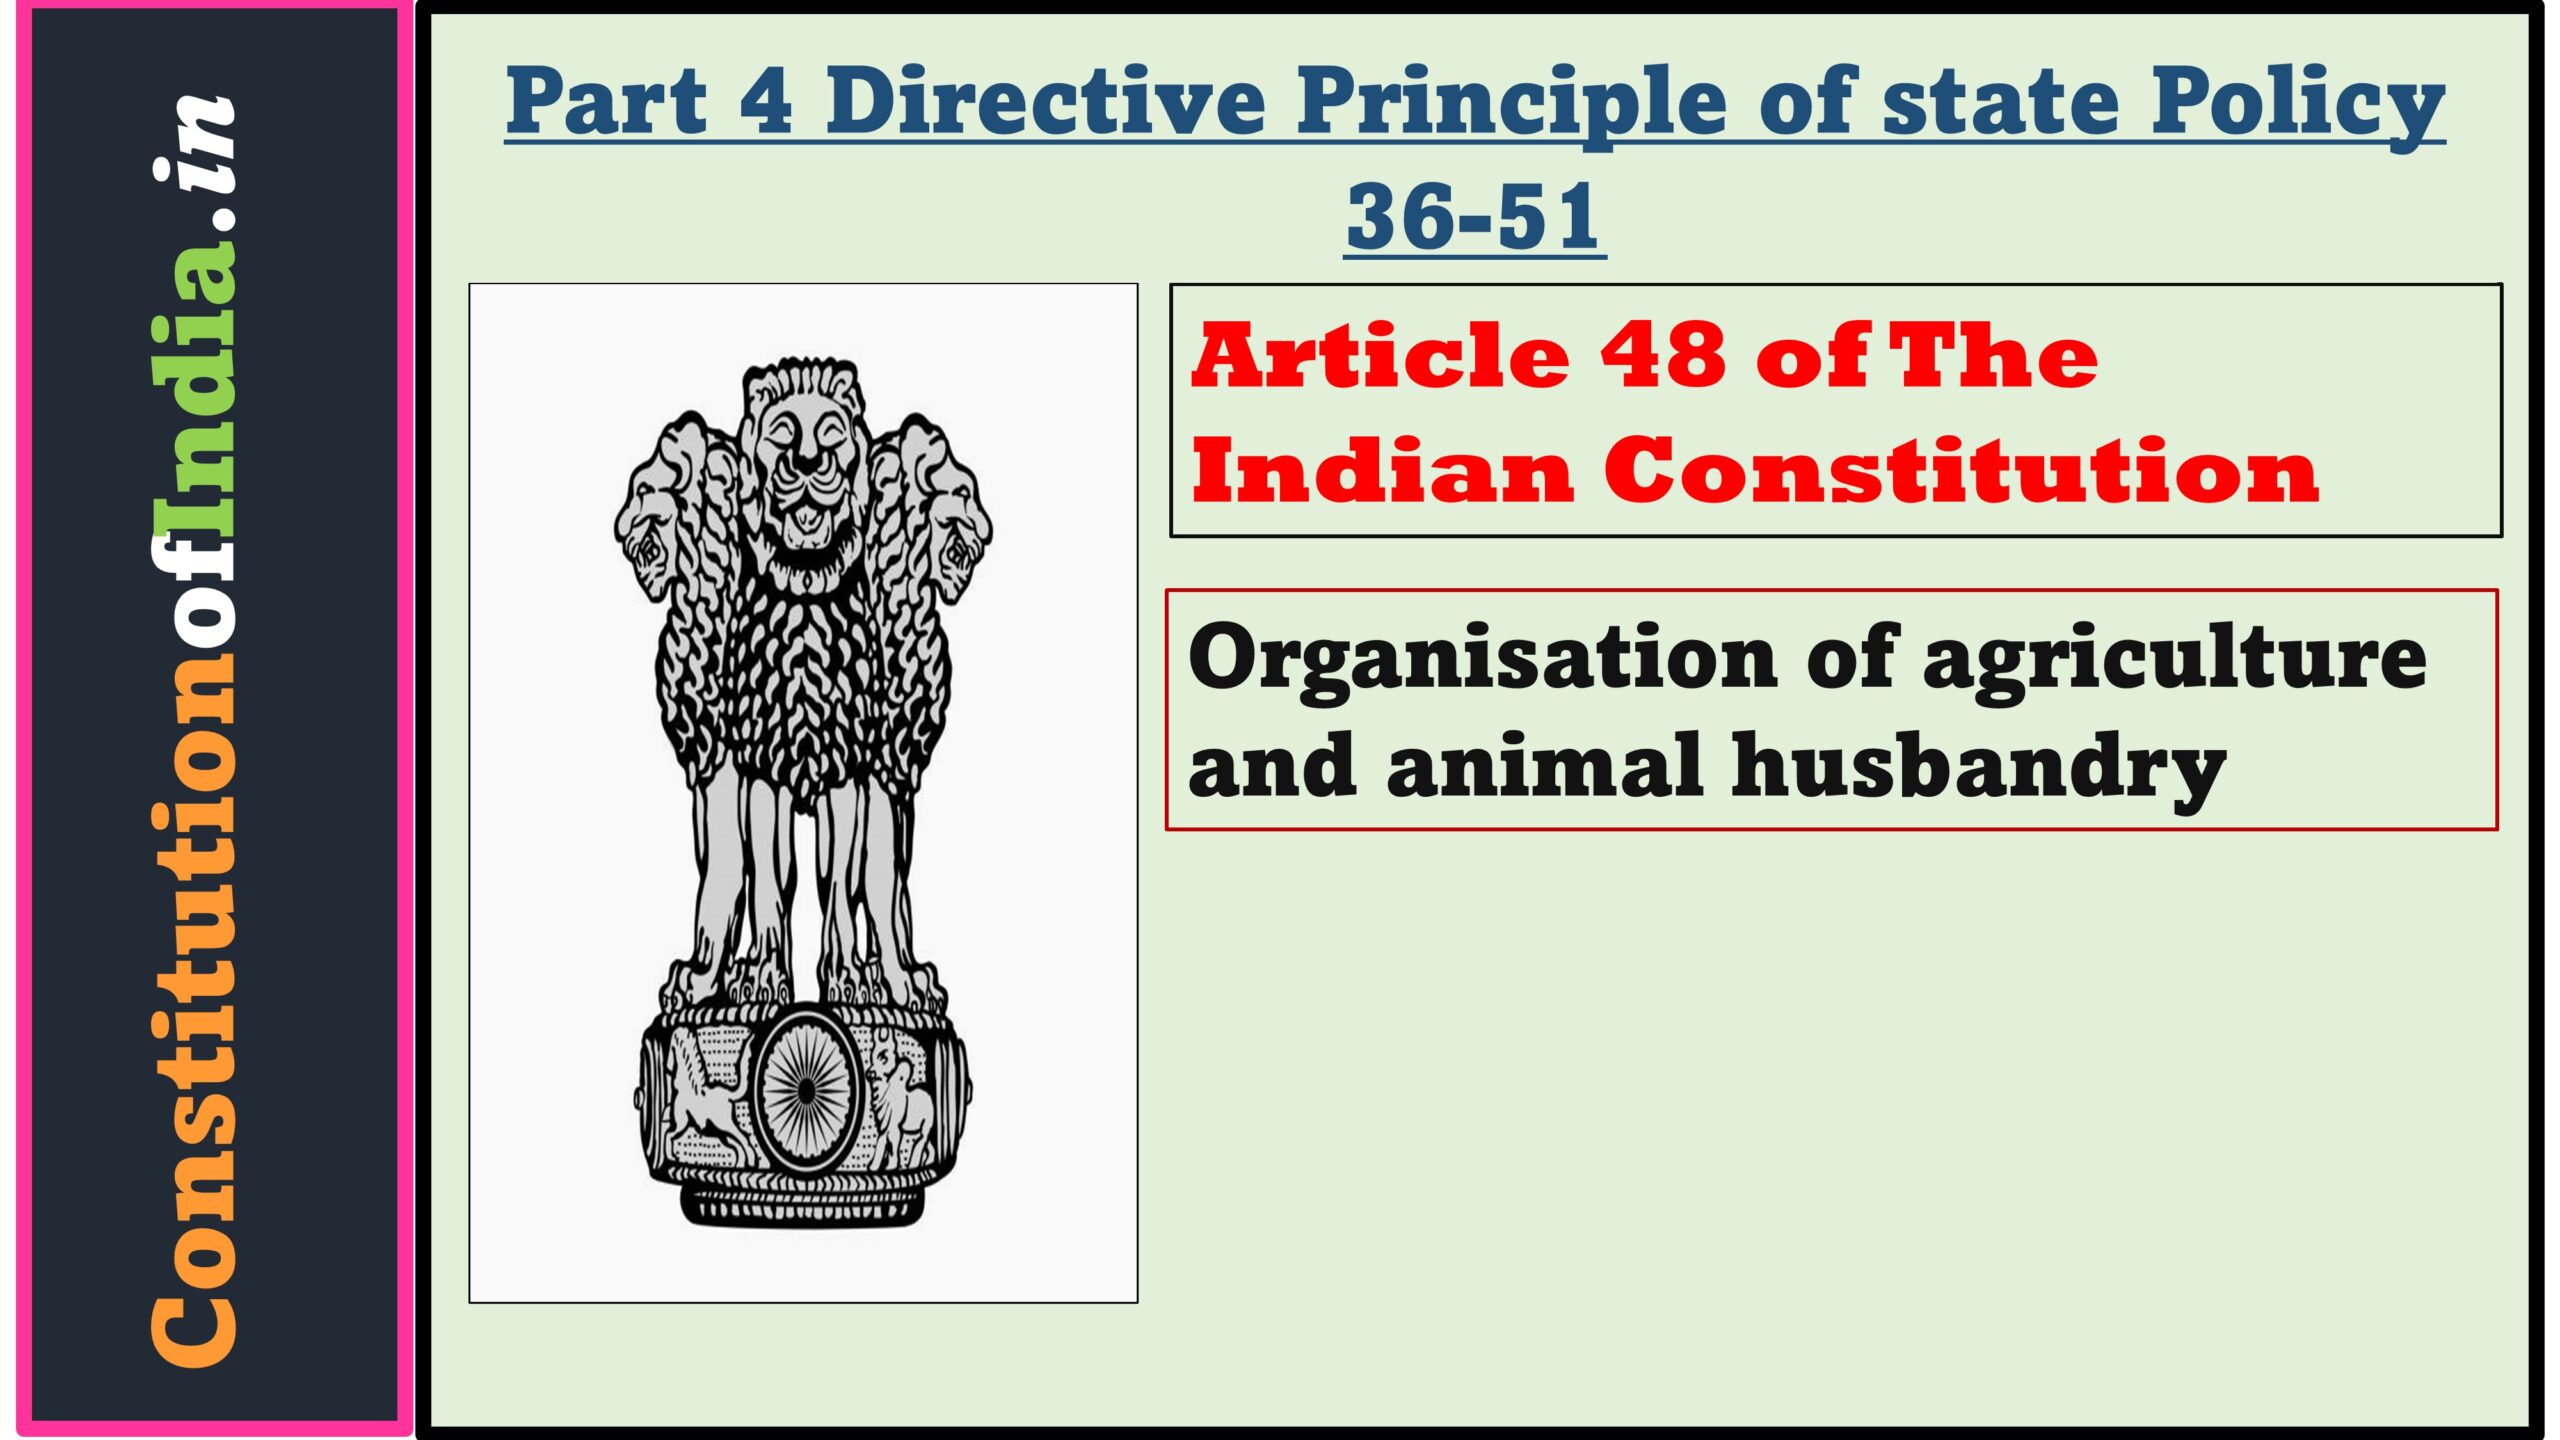 Article 48 of Indian Constitution: Organisation of agriculture and animal husbandry.